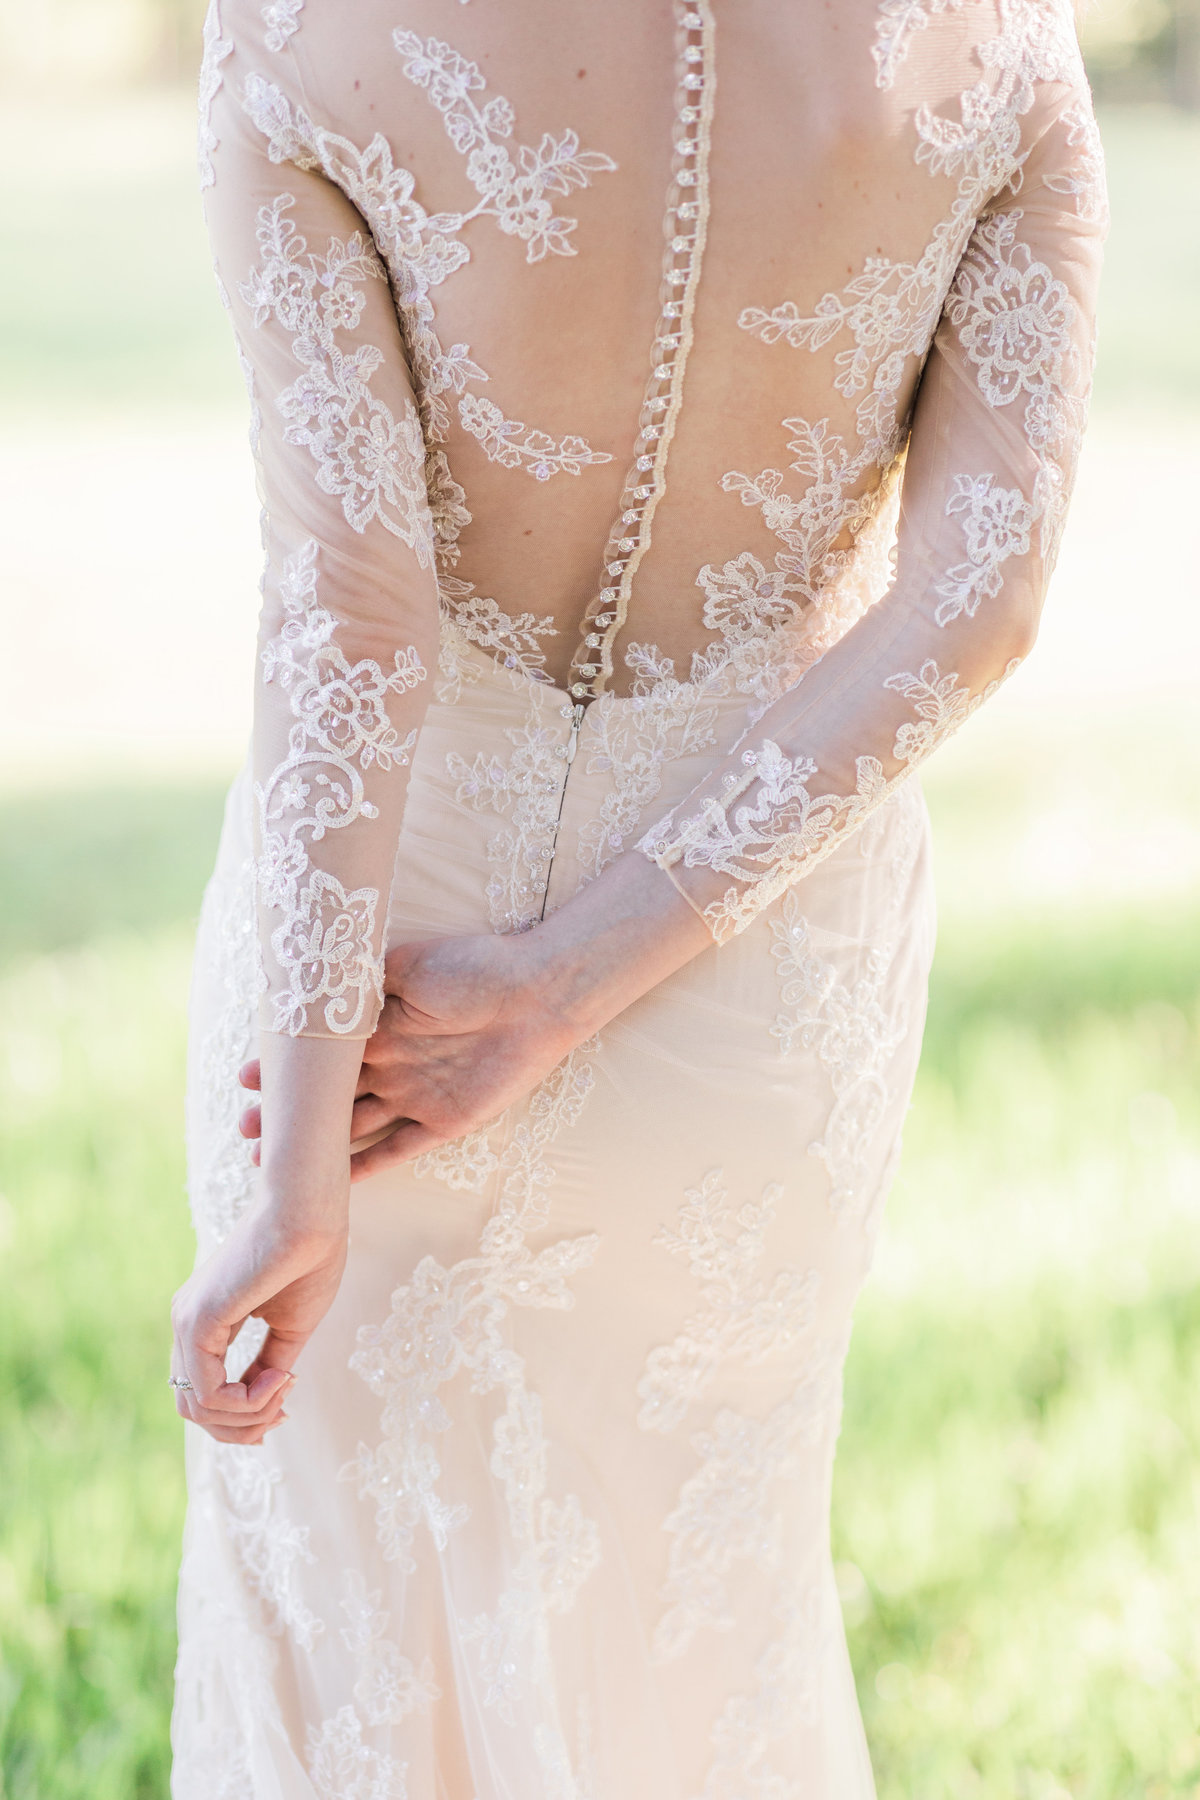 Details of a wedding dress in Houston, Texas